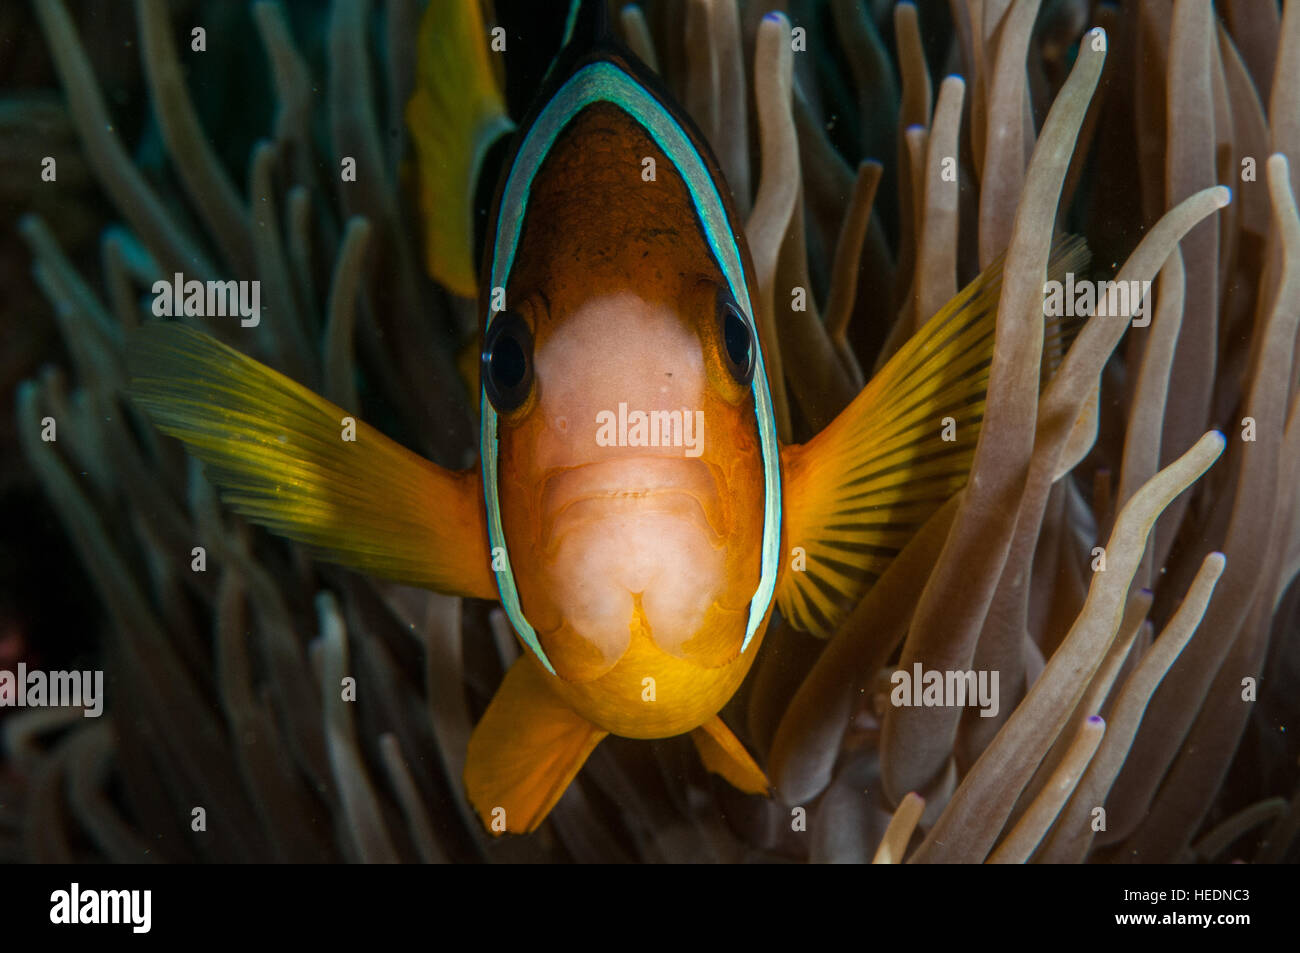 Amphiprion clarkii a Bali Foto Stock